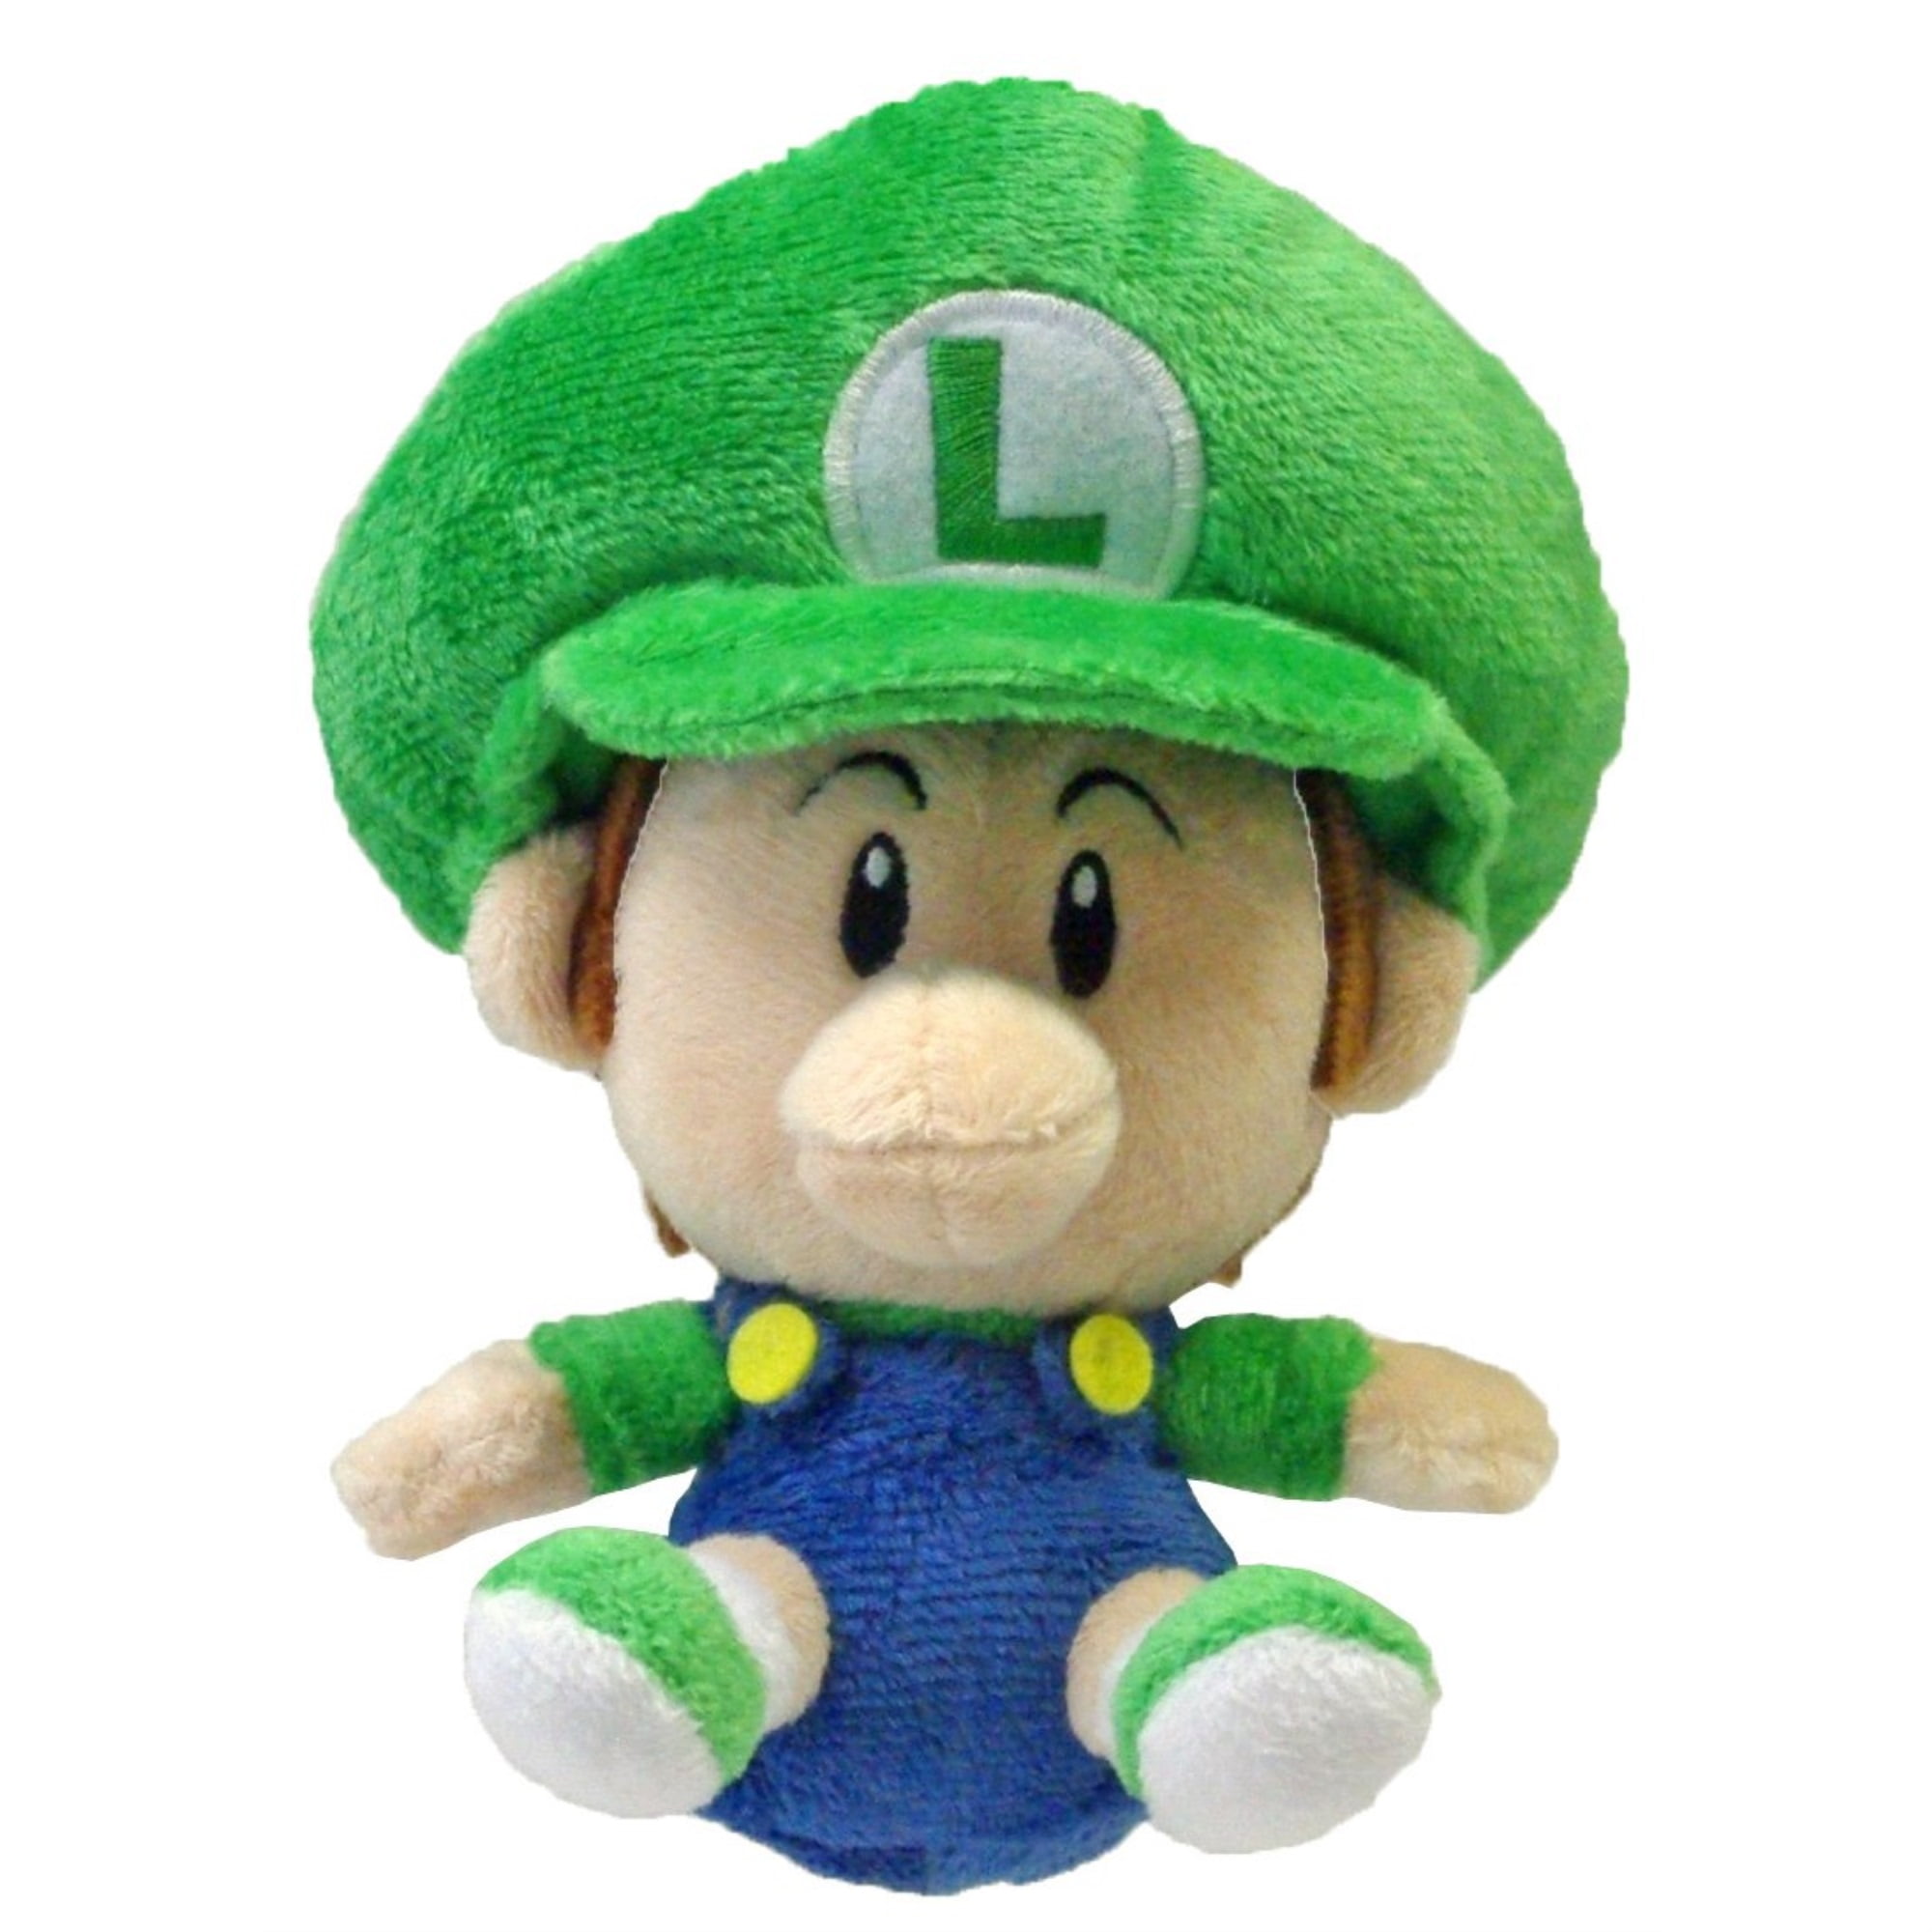 Details about   Little Buddy Super Mario Bros Lemmy 8" Plush Toy Doll Stuffed Animal 